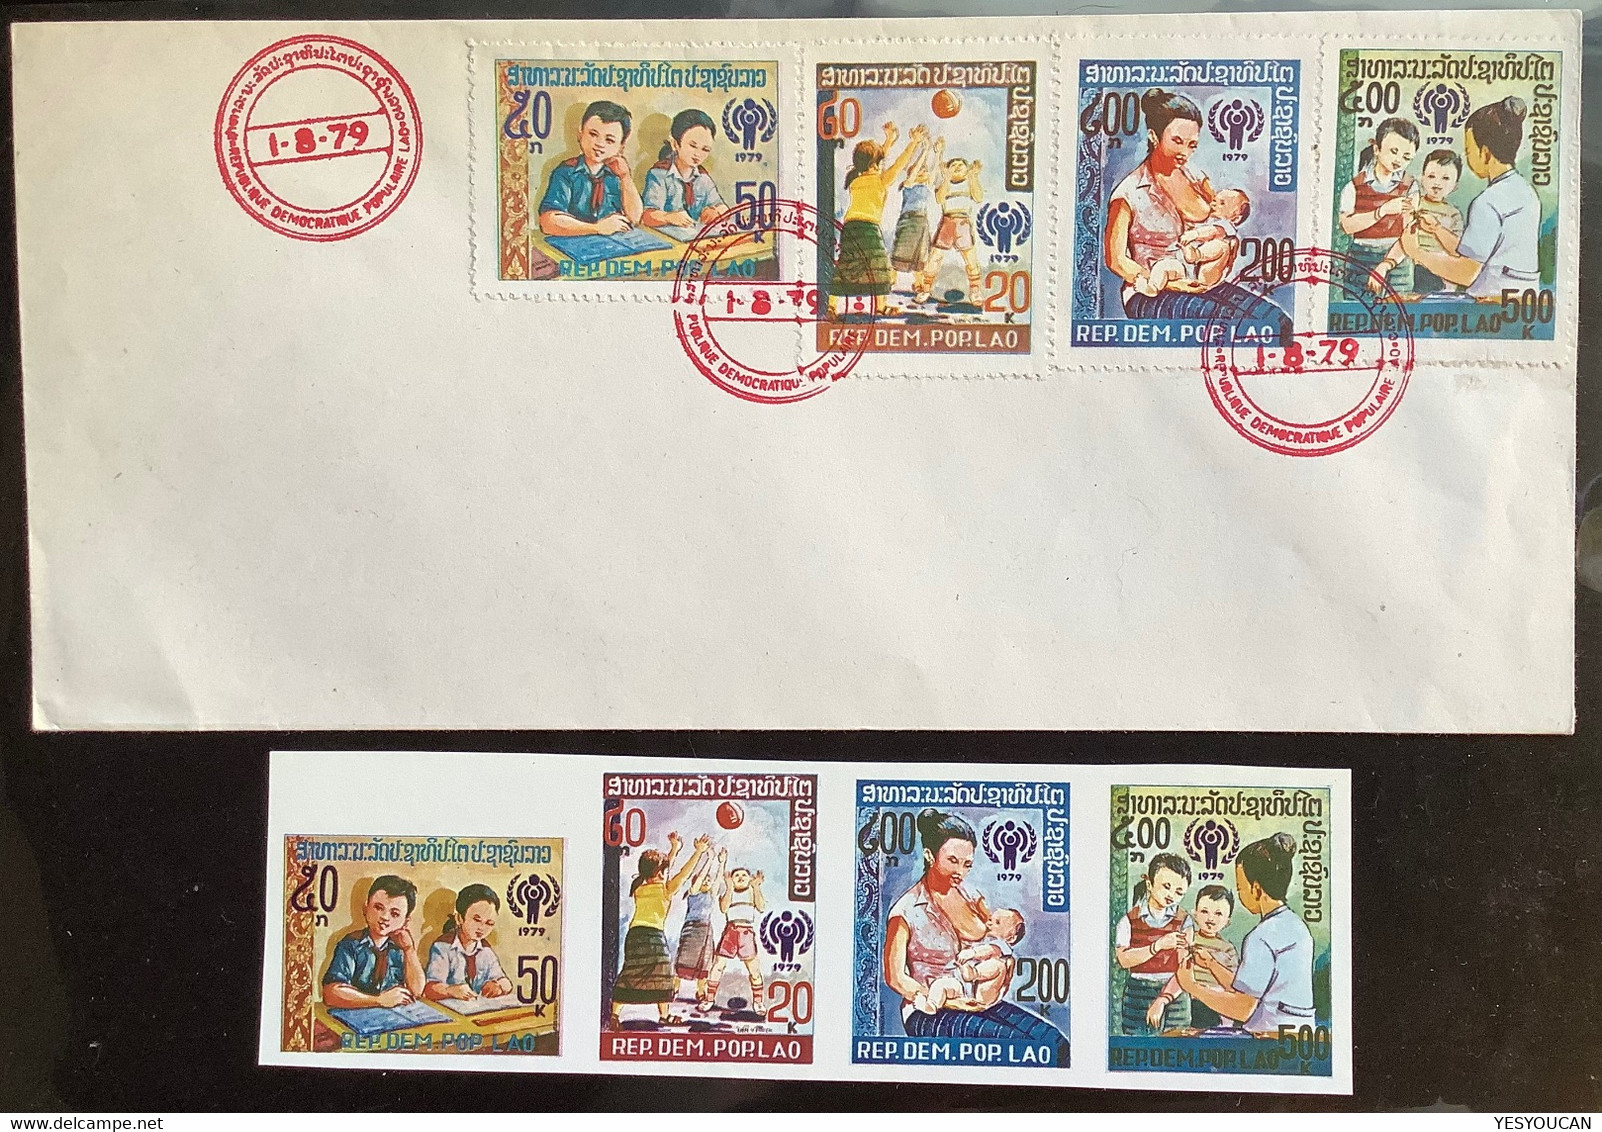 Laos 1979 YEAR OF THE CHILD UNICEF Stamps From SOUVENIR SHEET Mi 478 A/B-481 A/B Mint + FDC (Lao Children Enfant - Laos